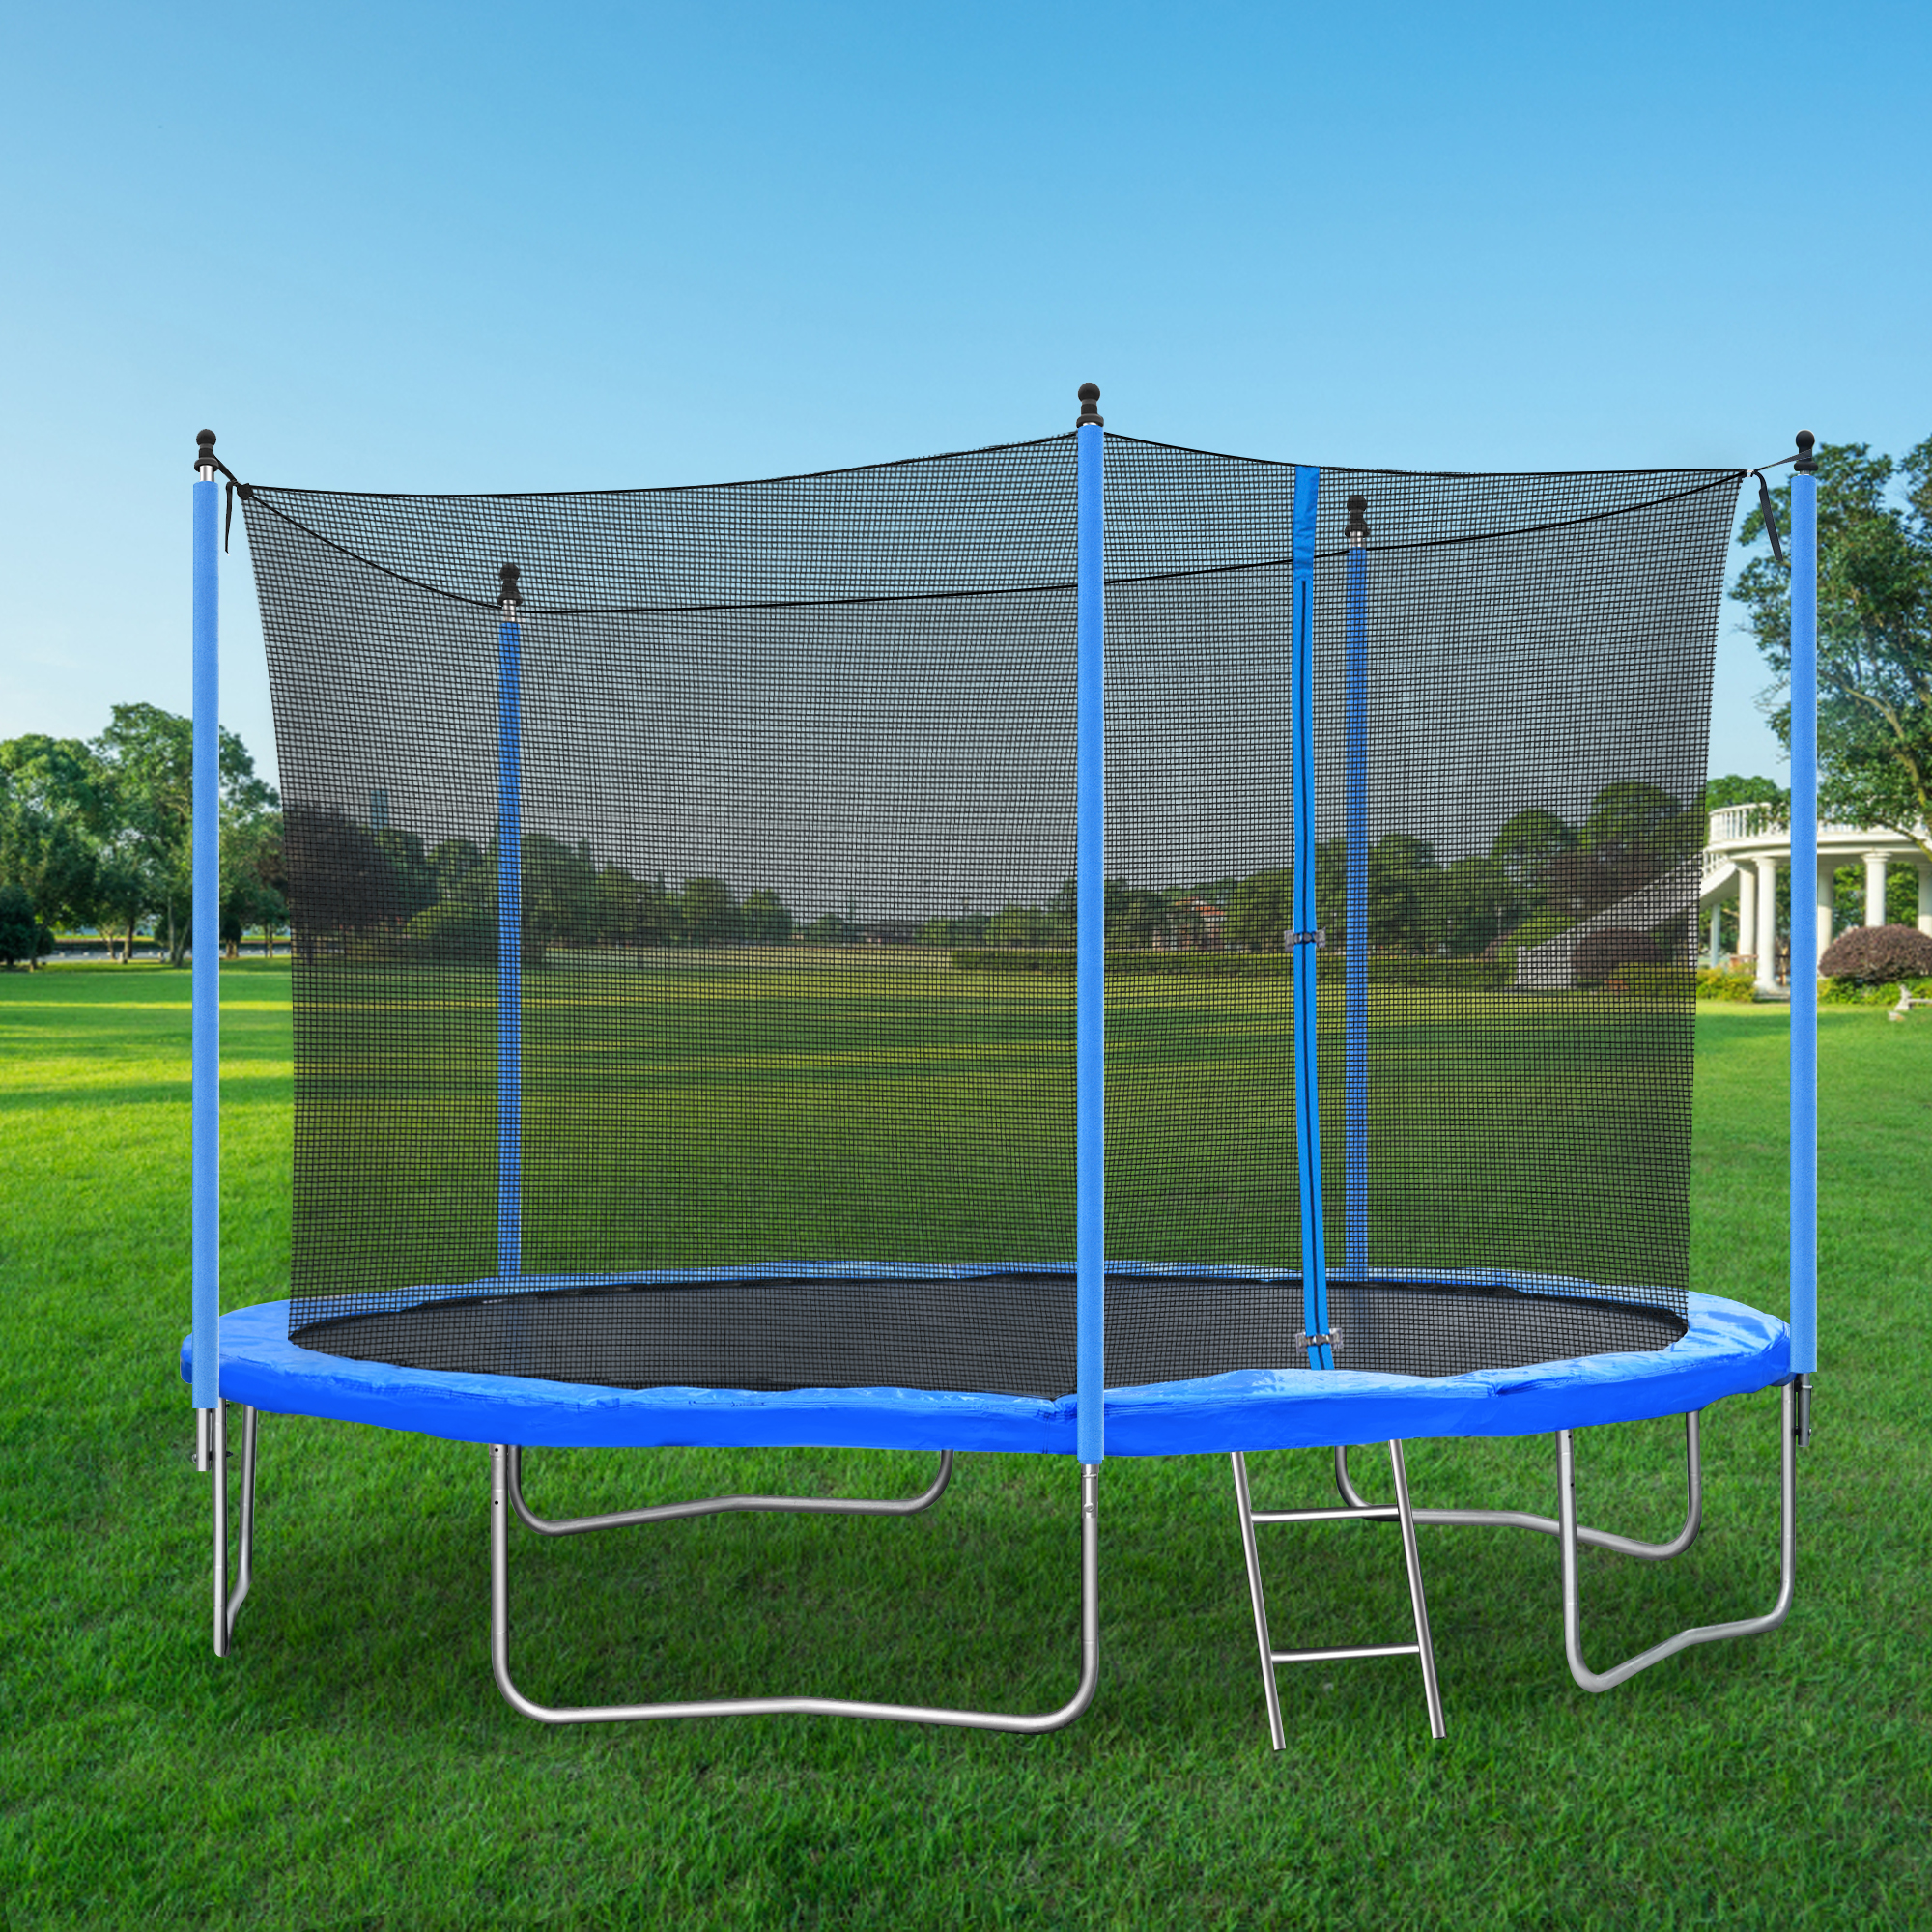 Euroco 12FT Trampoline for Kids, Solid Trampoline with Enclosure and Ladder for Adults and 4-5 Kids, Outdoor Recreation Trampoline, High Duty Safety - image 2 of 10